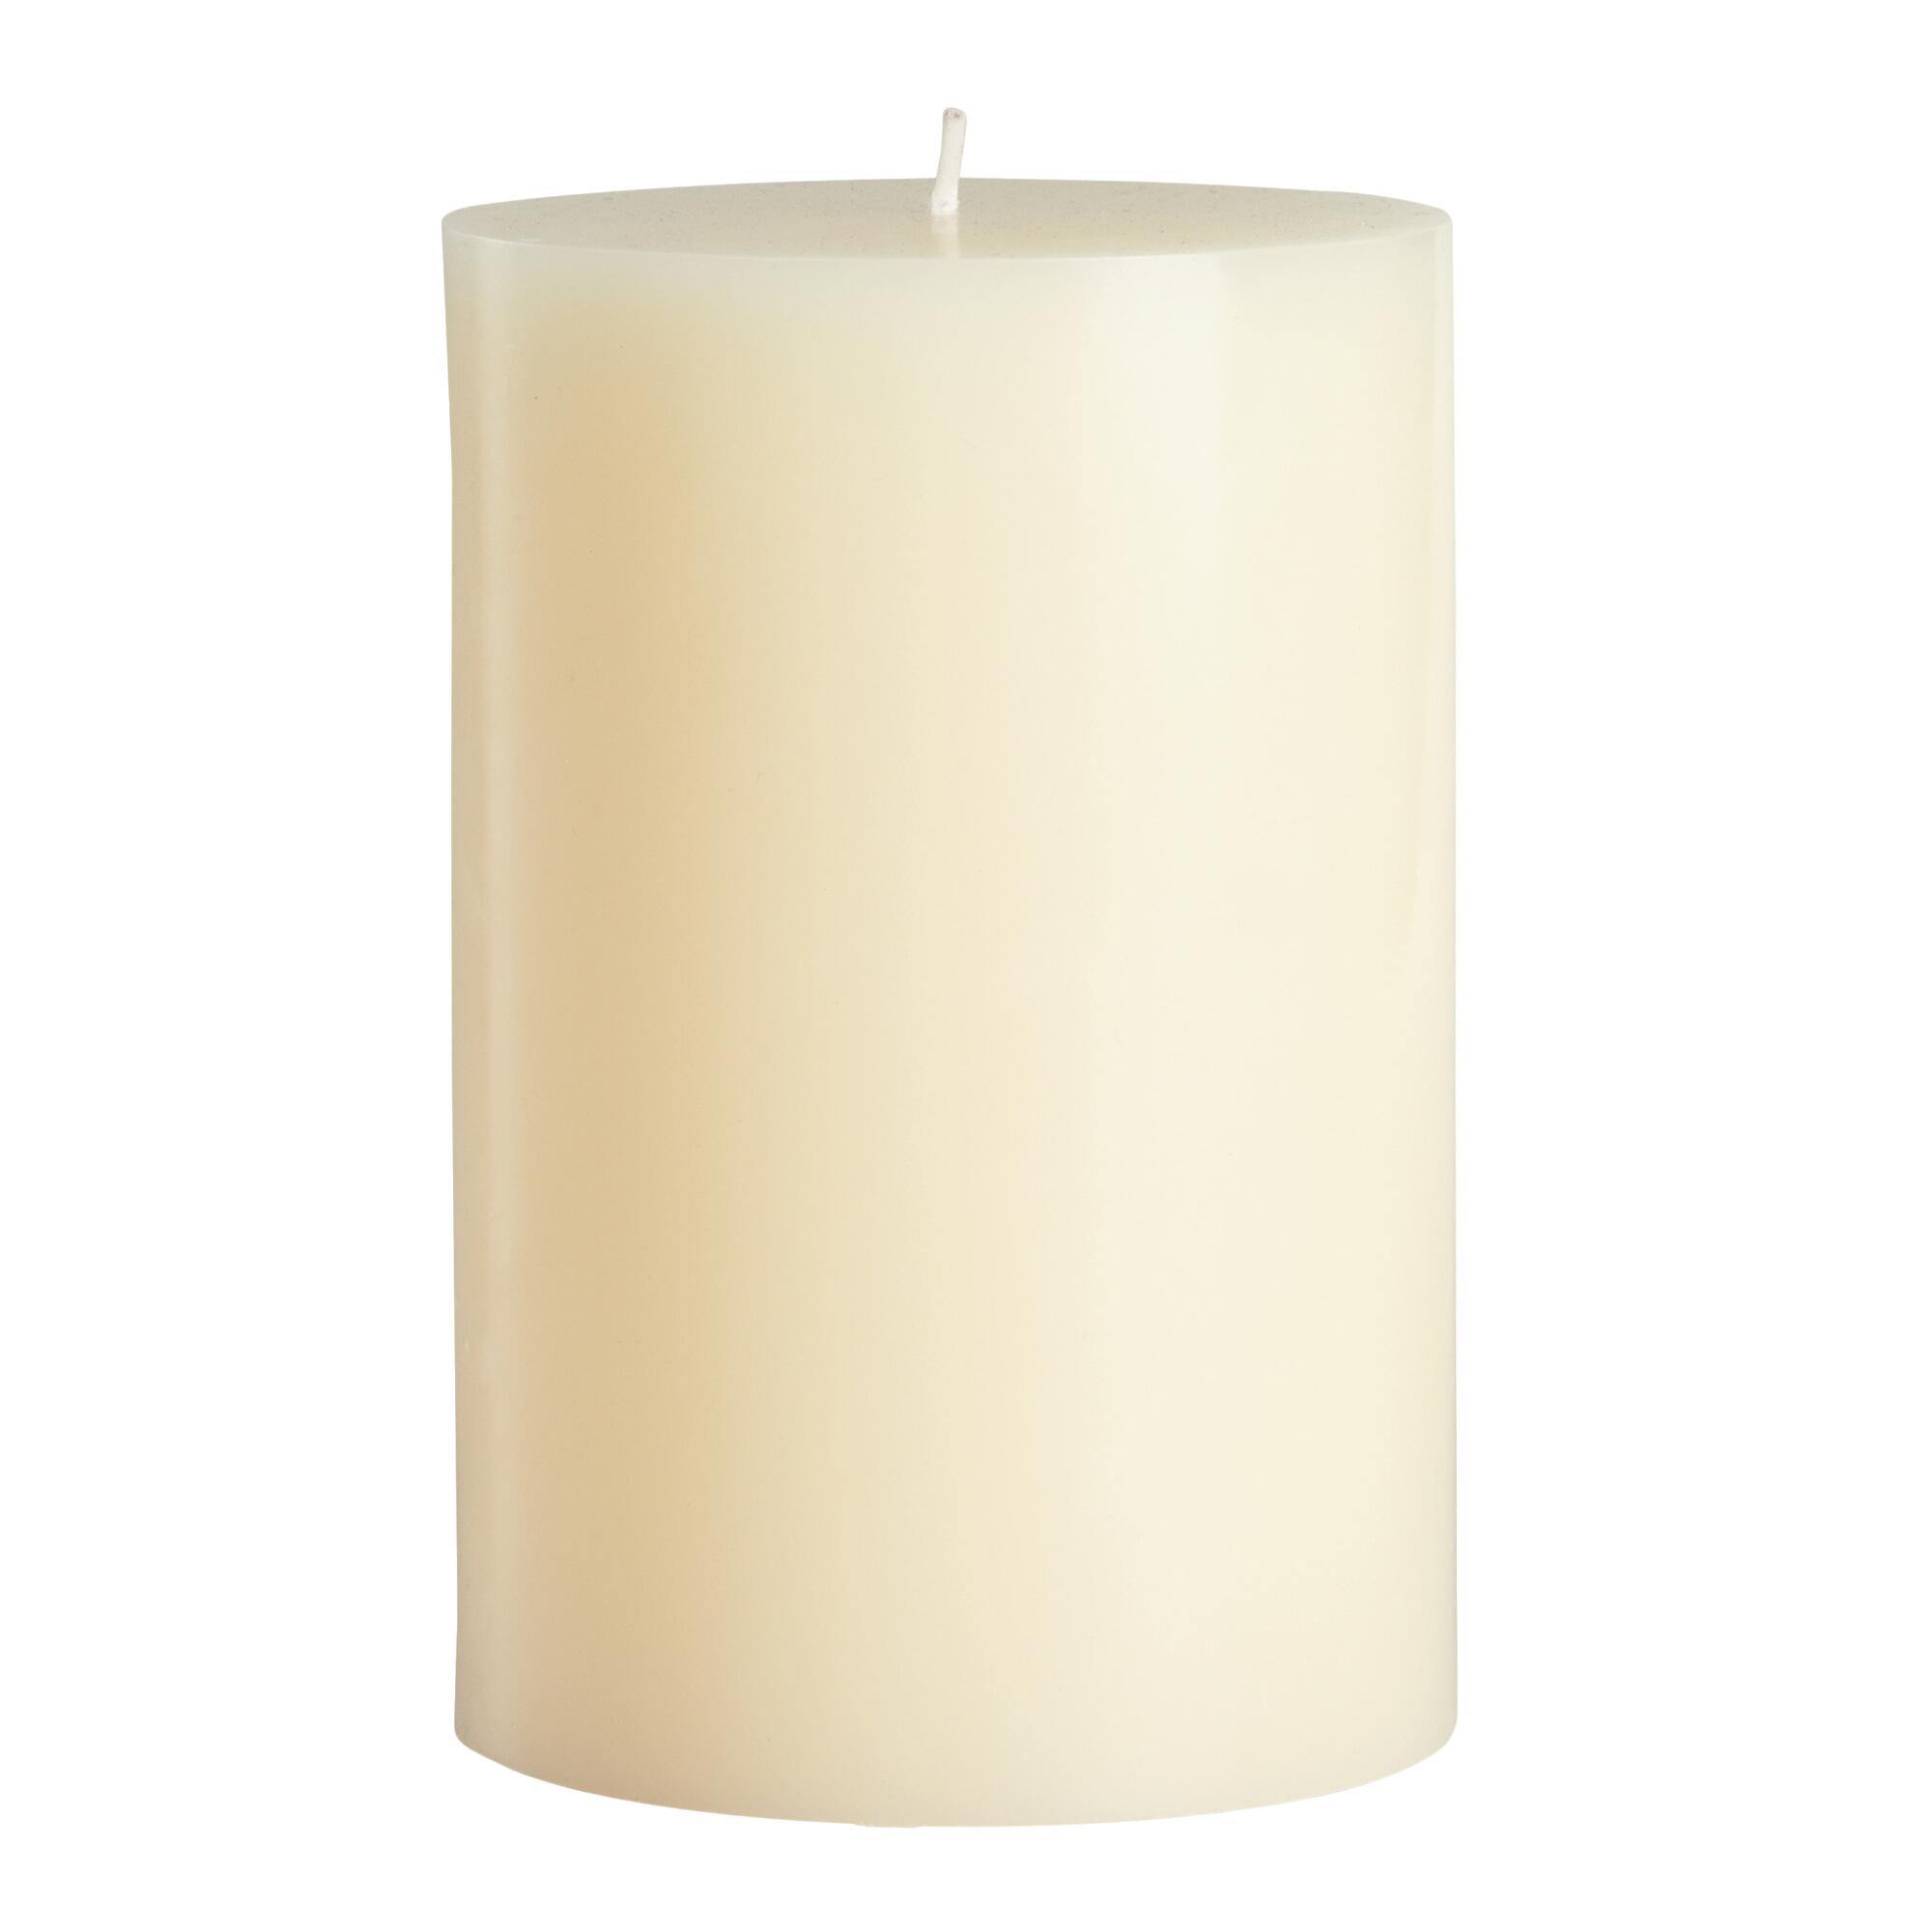 4x6 Ivory Unscented Pillar Candle: White - Wax by World Market